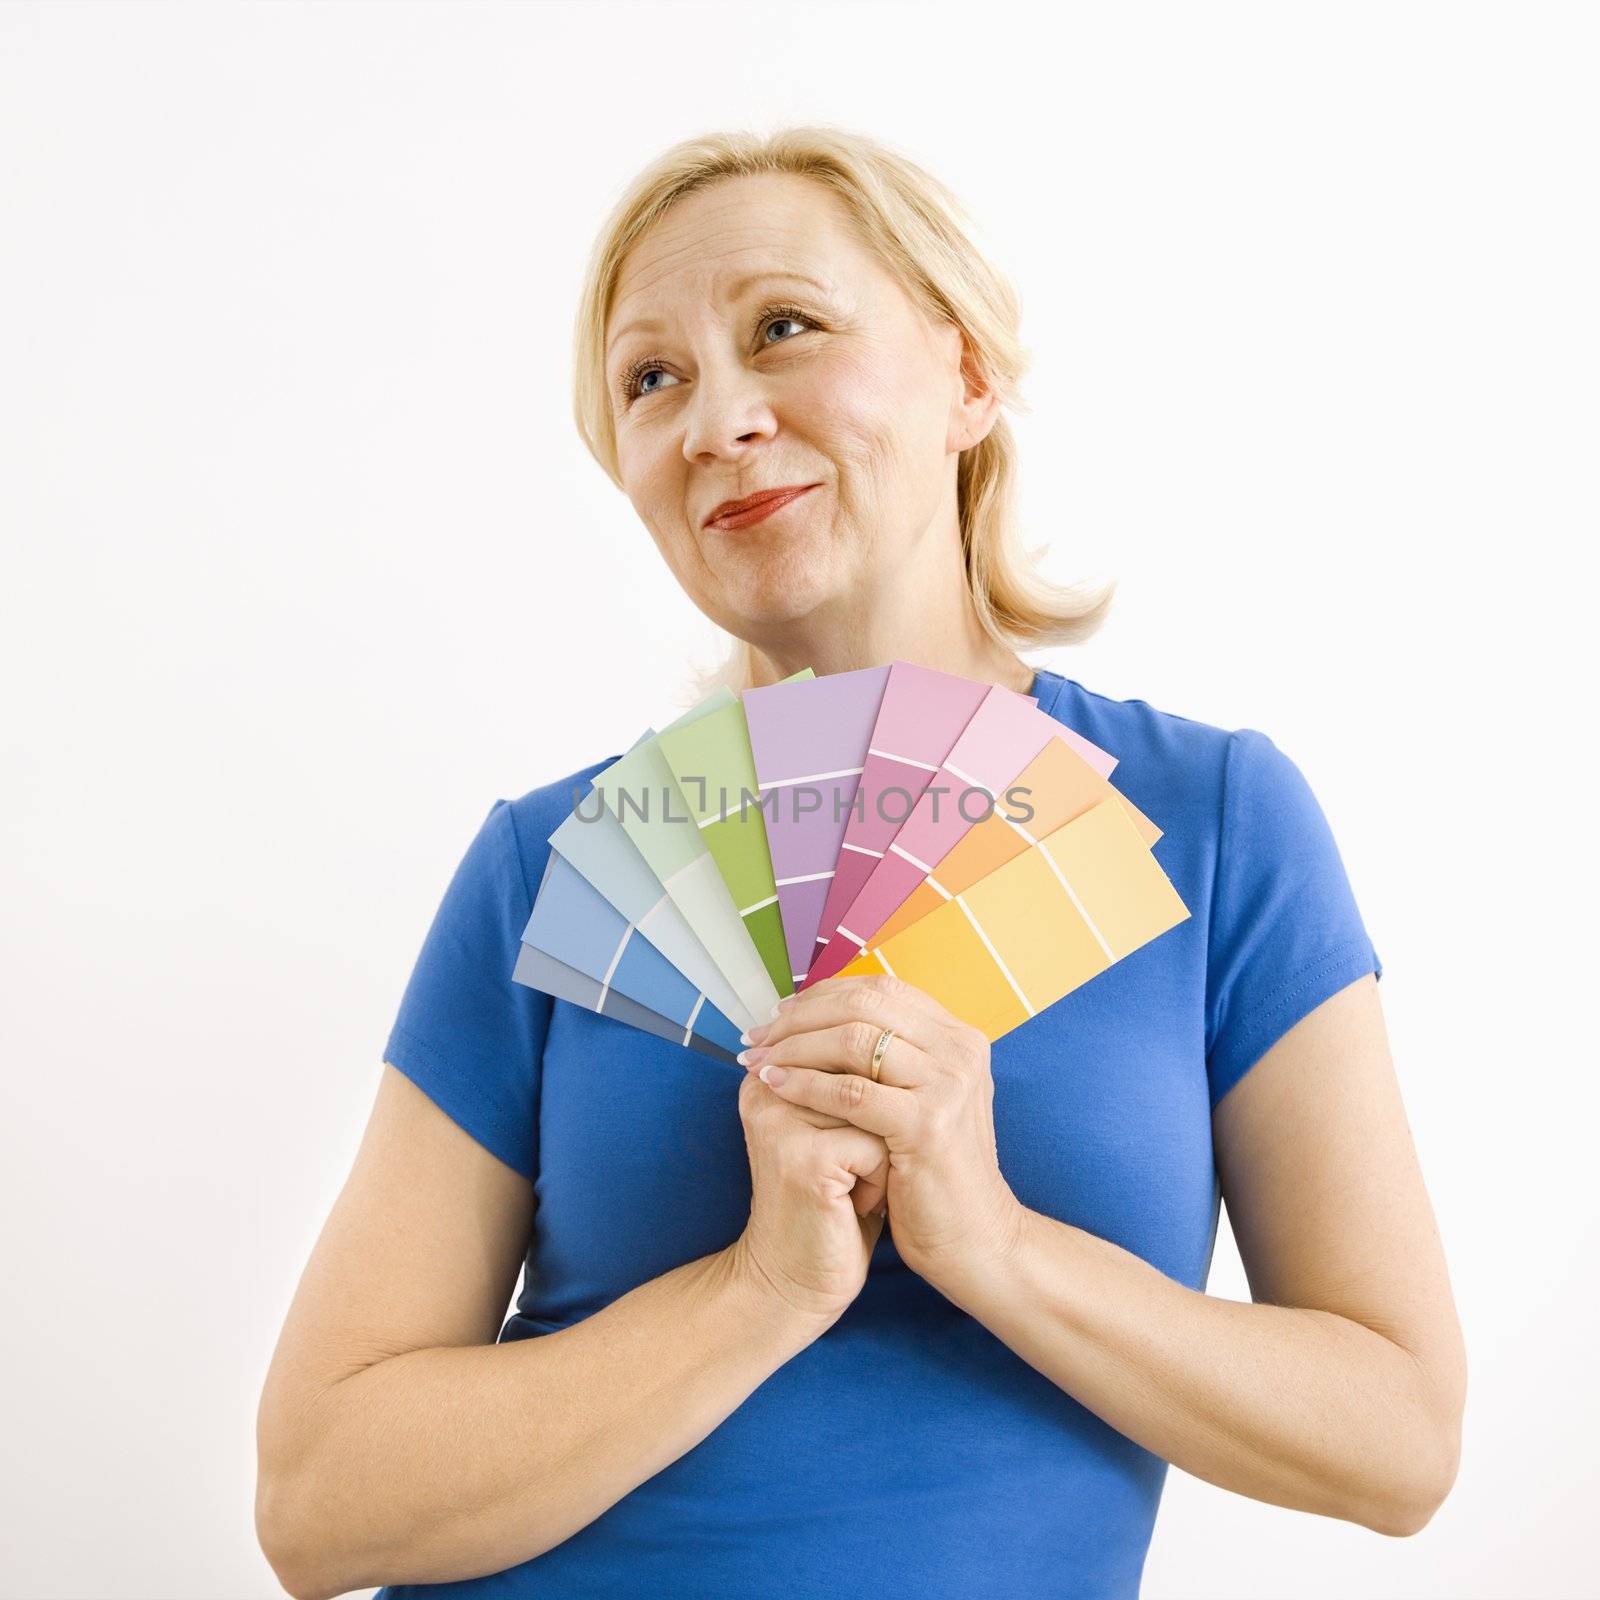 Portrait of smiling adult blonde woman holding paint swatches with hopeful expression.